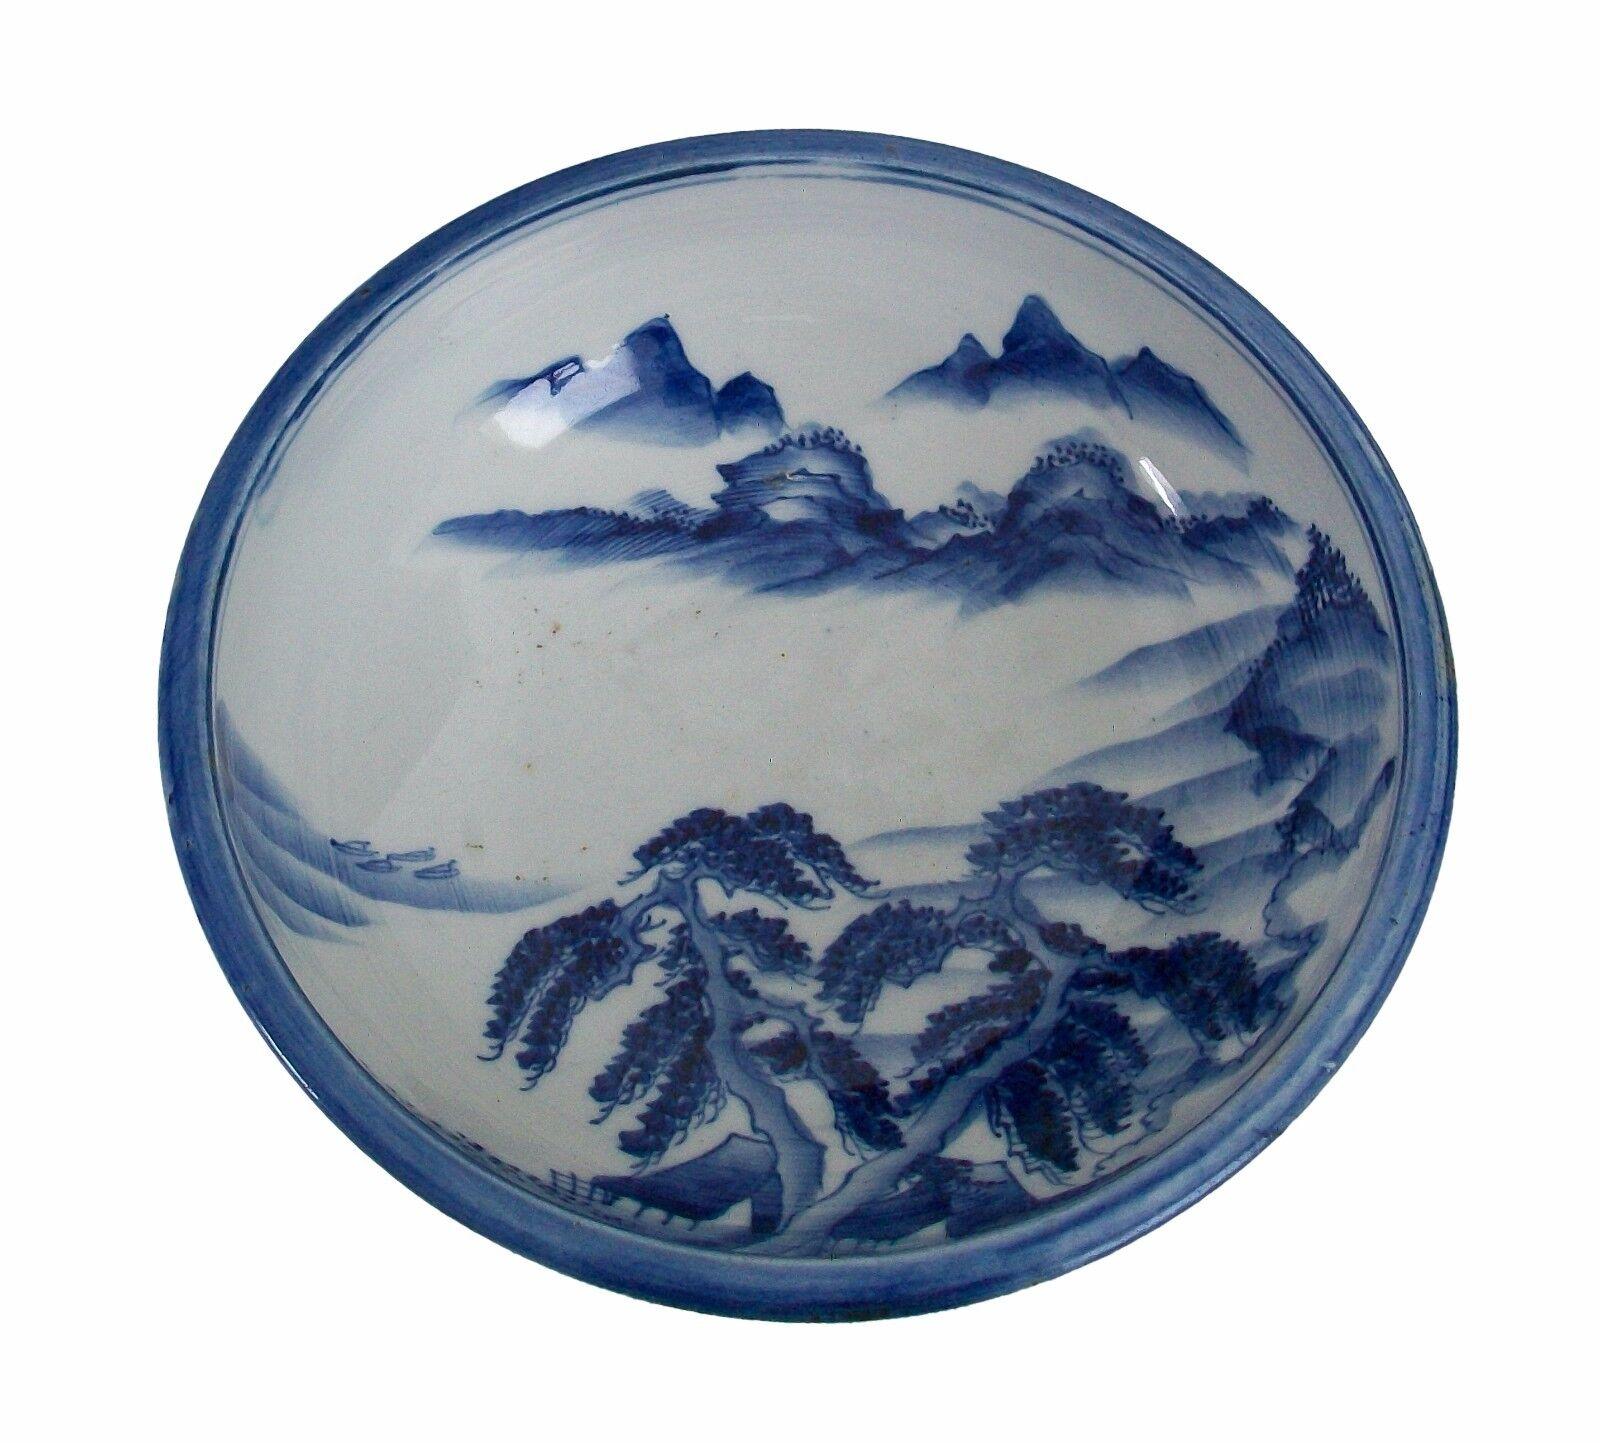 Glazed Vintage Blue & White Bowl, Hand Painted, Signed, Japan, Mid 20th Century For Sale